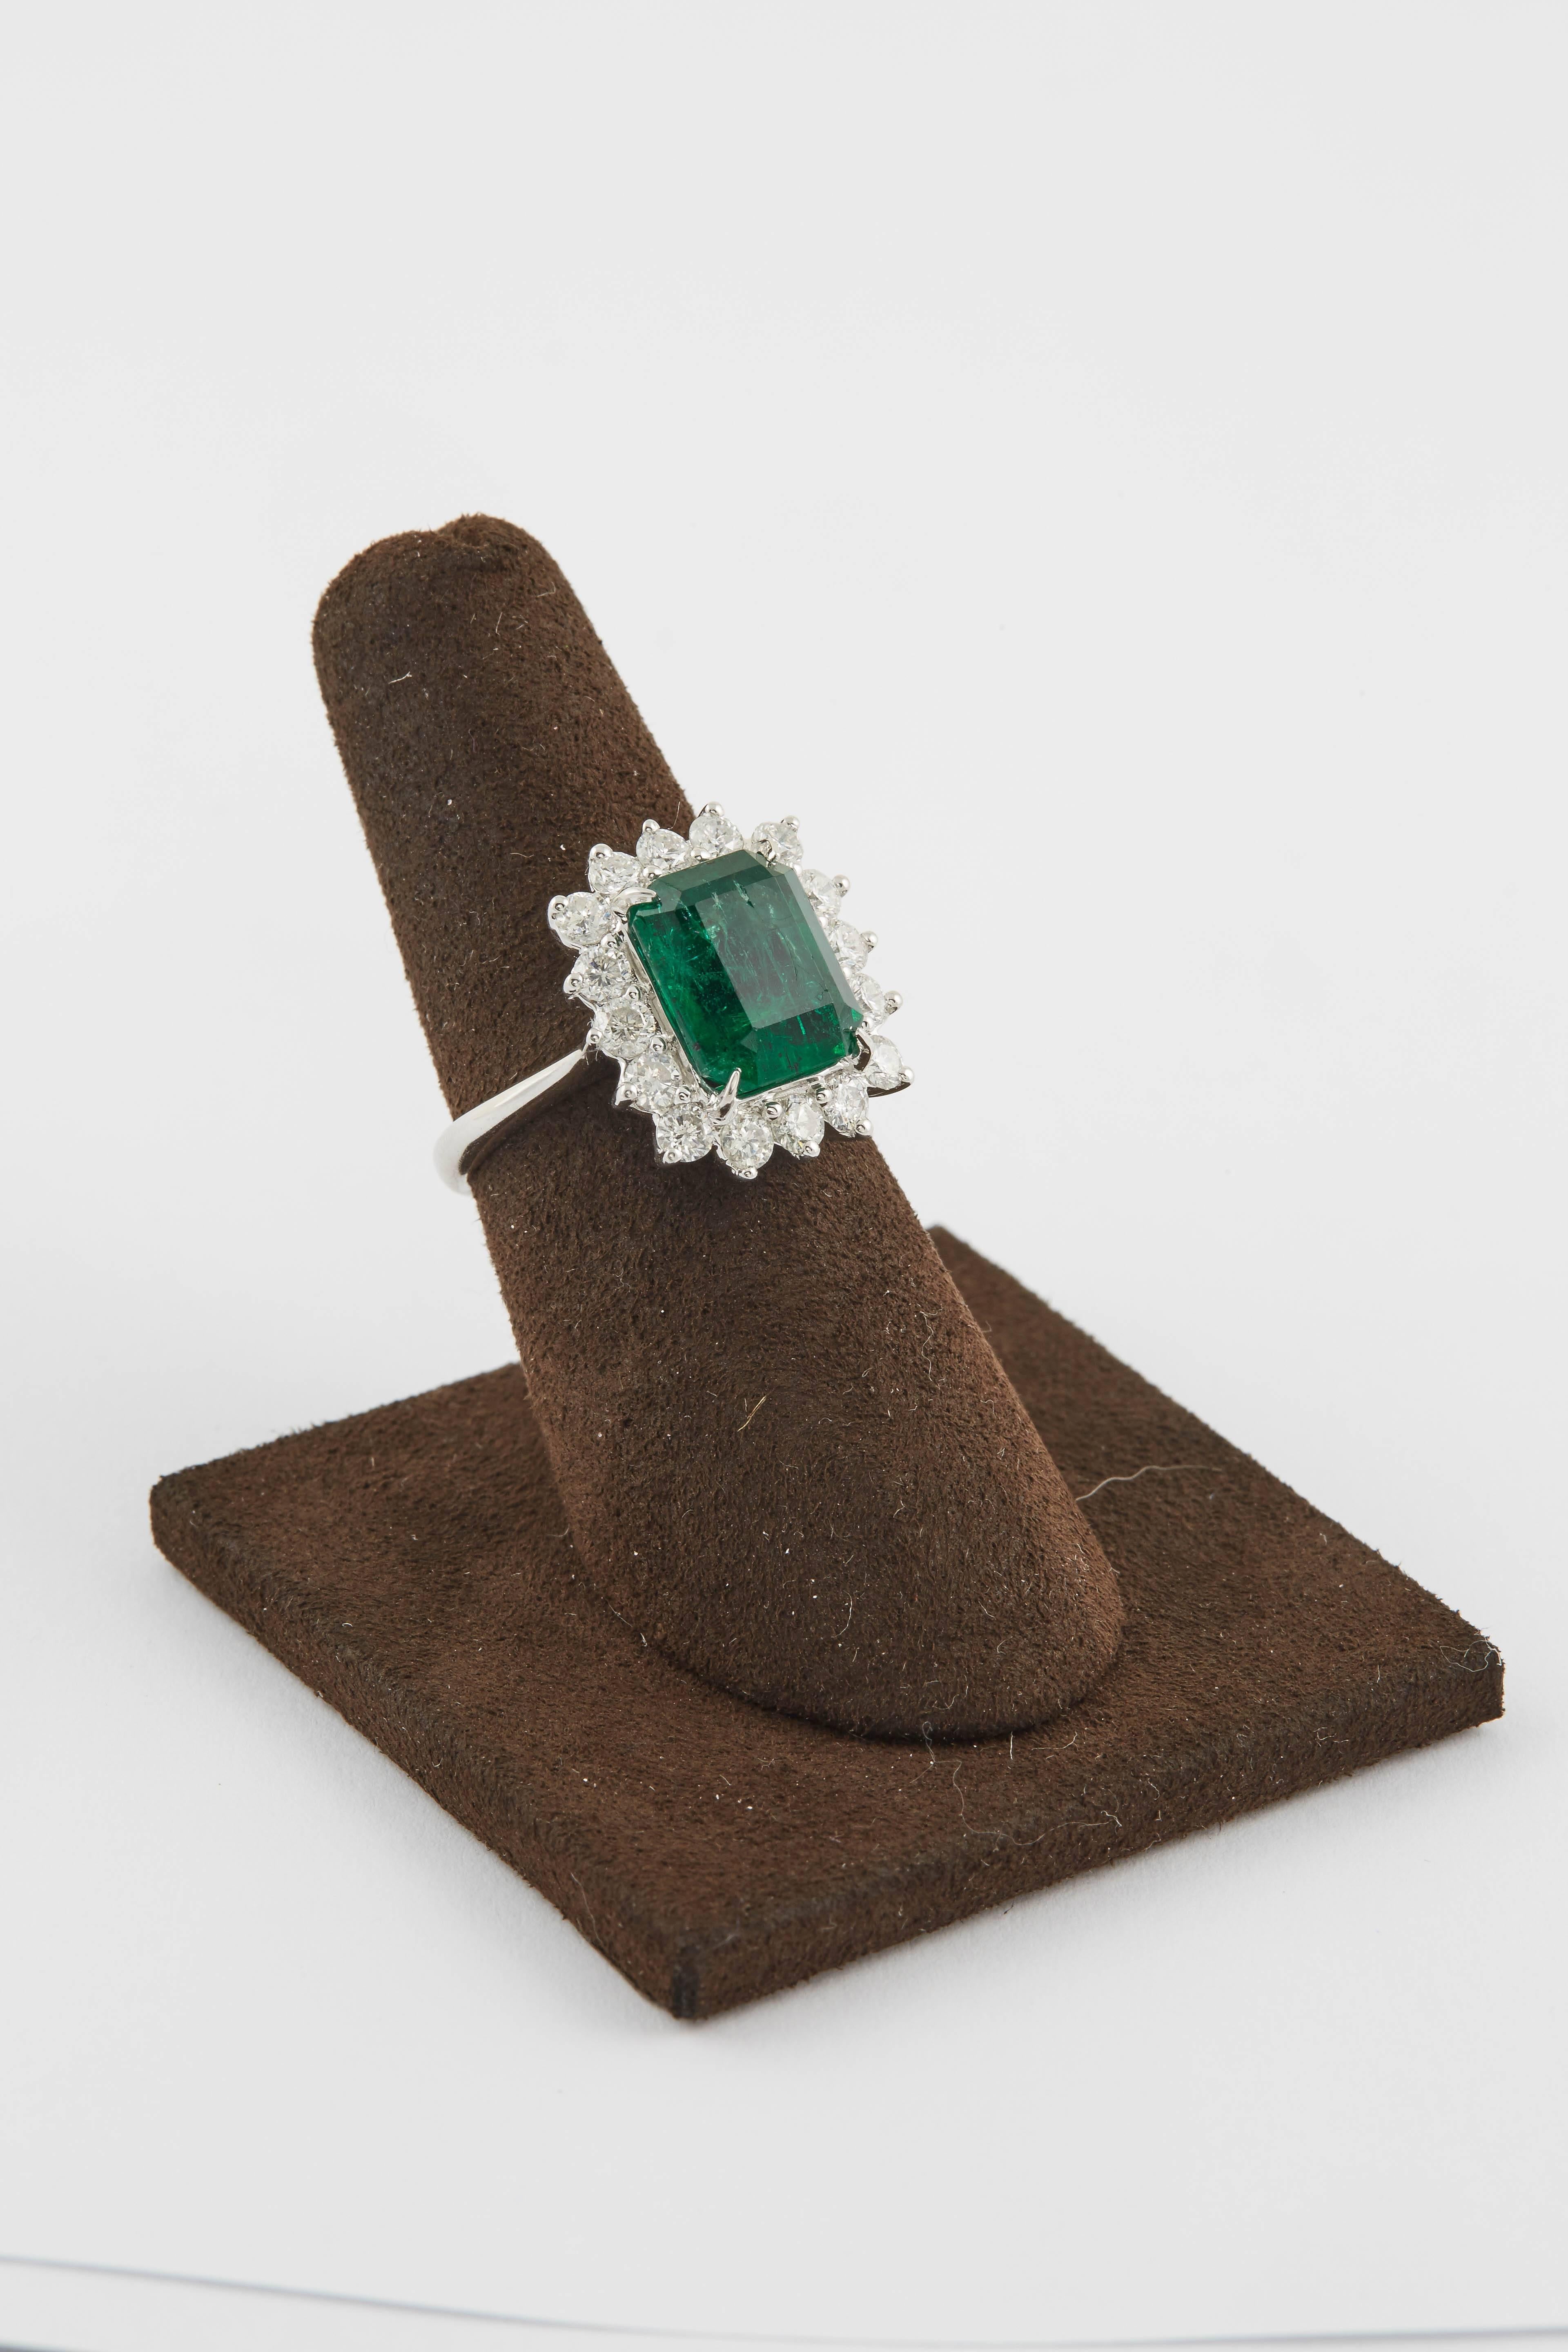 

A beautiful ring!

4.20 carat center Green Emerald with fine color.

1.19 carats of round brilliant cut diamonds, F/G VS.

18k white gold

The ring is currently a size 6.5 but can be sized to any finger size. 

